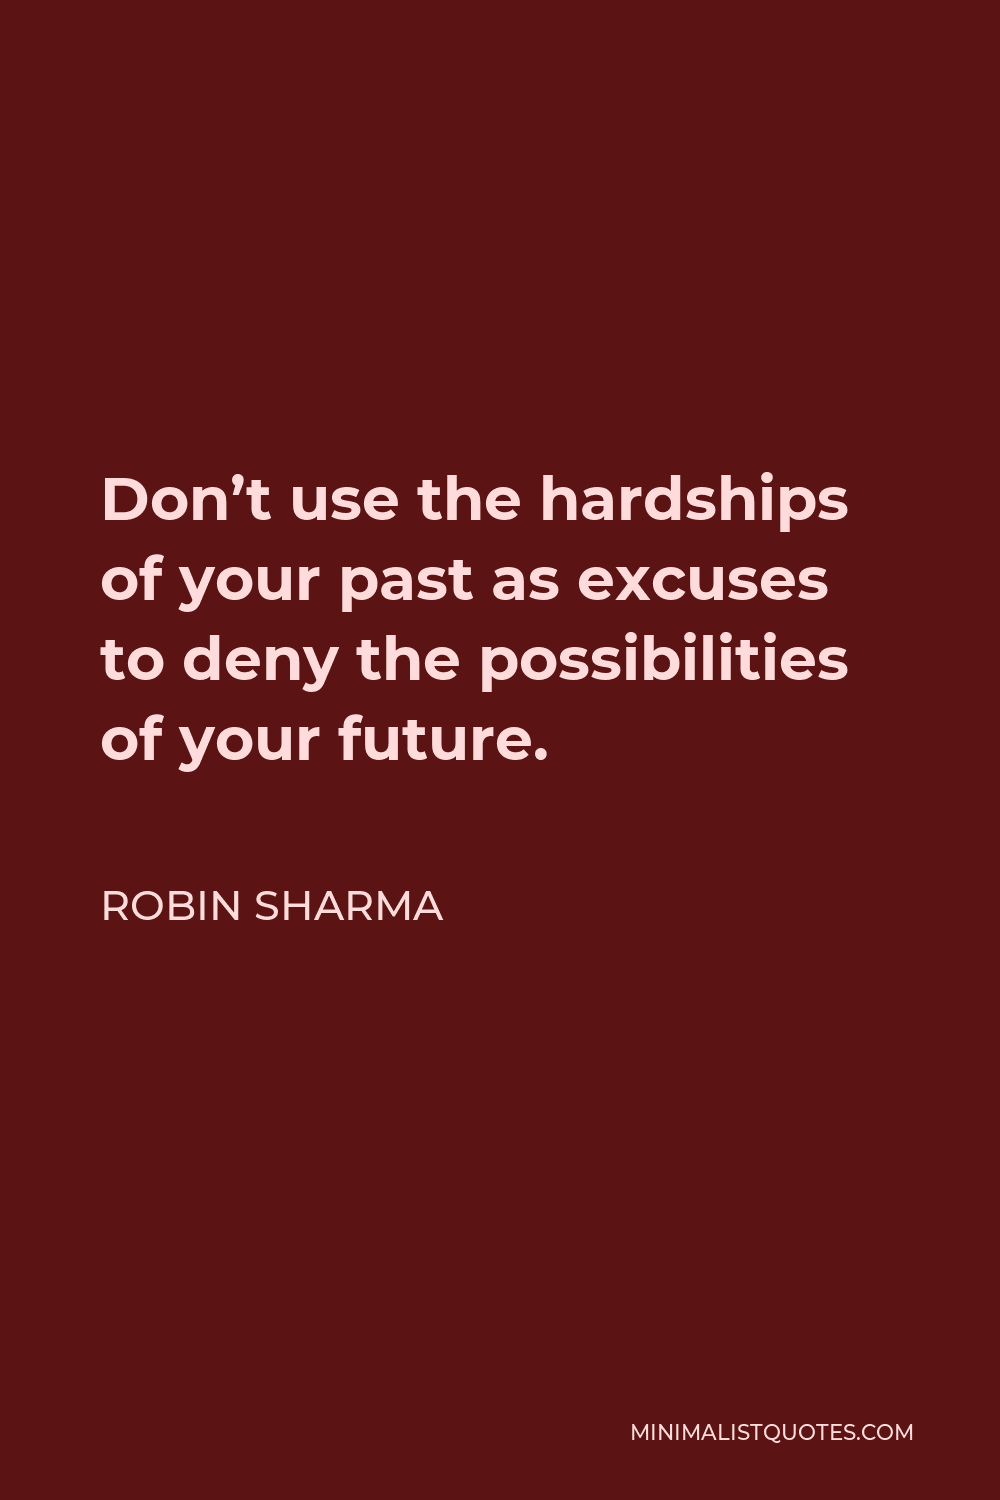 Robin Sharma Quote - Don’t use the hardships of your past as excuses to deny the possibilities of your future.